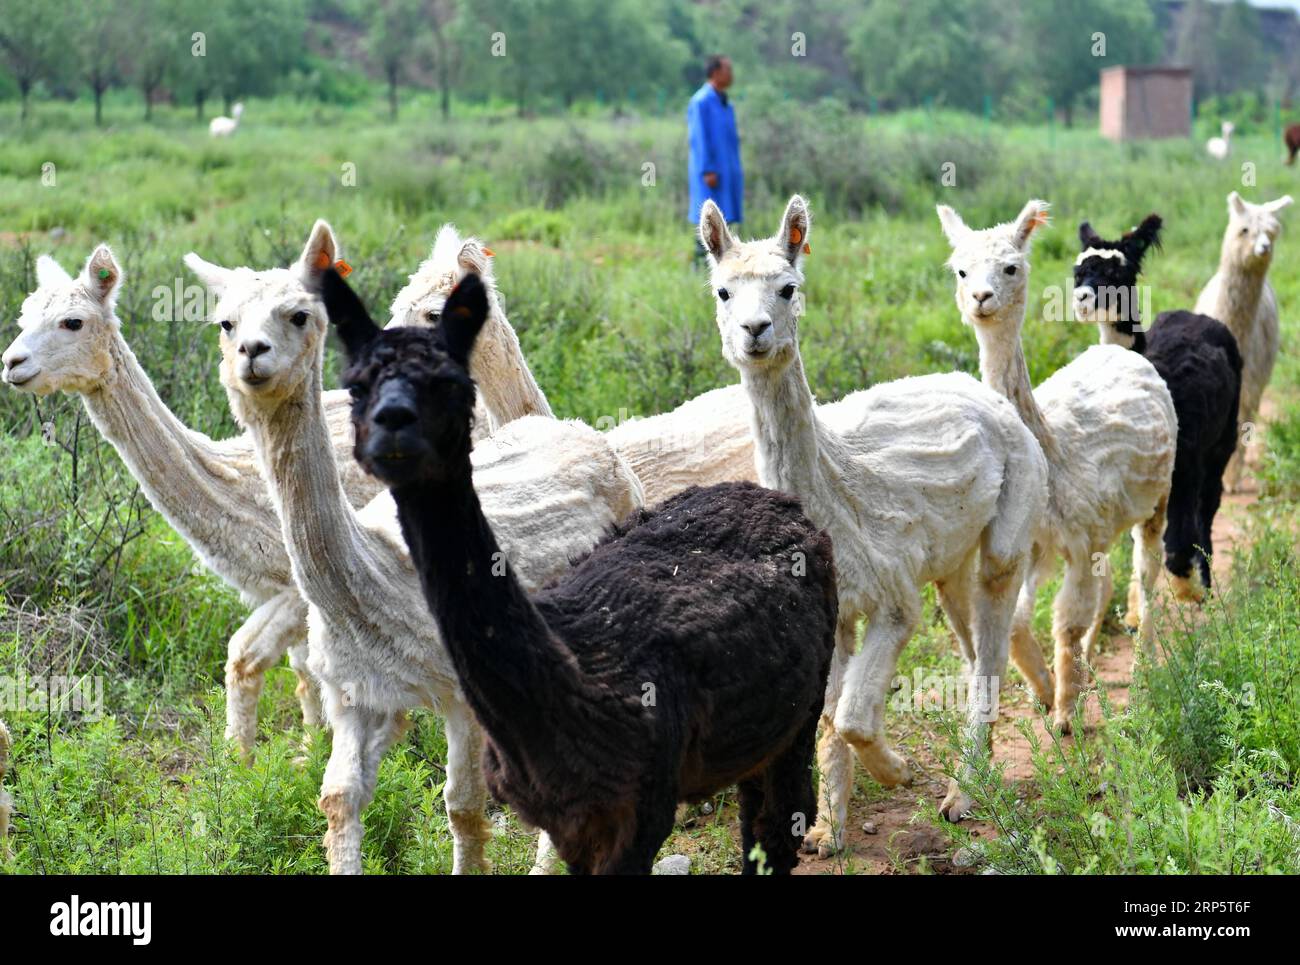 (181223) -- BEIJING, Dec. 23, 2018 (Xinhua) -- Alpacas graze on the hill in Yangqu County of north China s Shanxi Province, July 14, 2018. Liu Xuerong, a poverty-stricken farmer from Pingli Village of Yangqu County, started embarking on cultivating those Australia-originated alpacas in 2014. The breeding base makes a profit from cub breeding, woolen products and tourism of alpaca watching. Liu accordingly earns a monthly wage of 3,000 yuan (about 449 U.S. dollars). Areas of China suffering from extreme poverty have made faster progress in terms of poverty relief compared to the country s avera Stock Photo